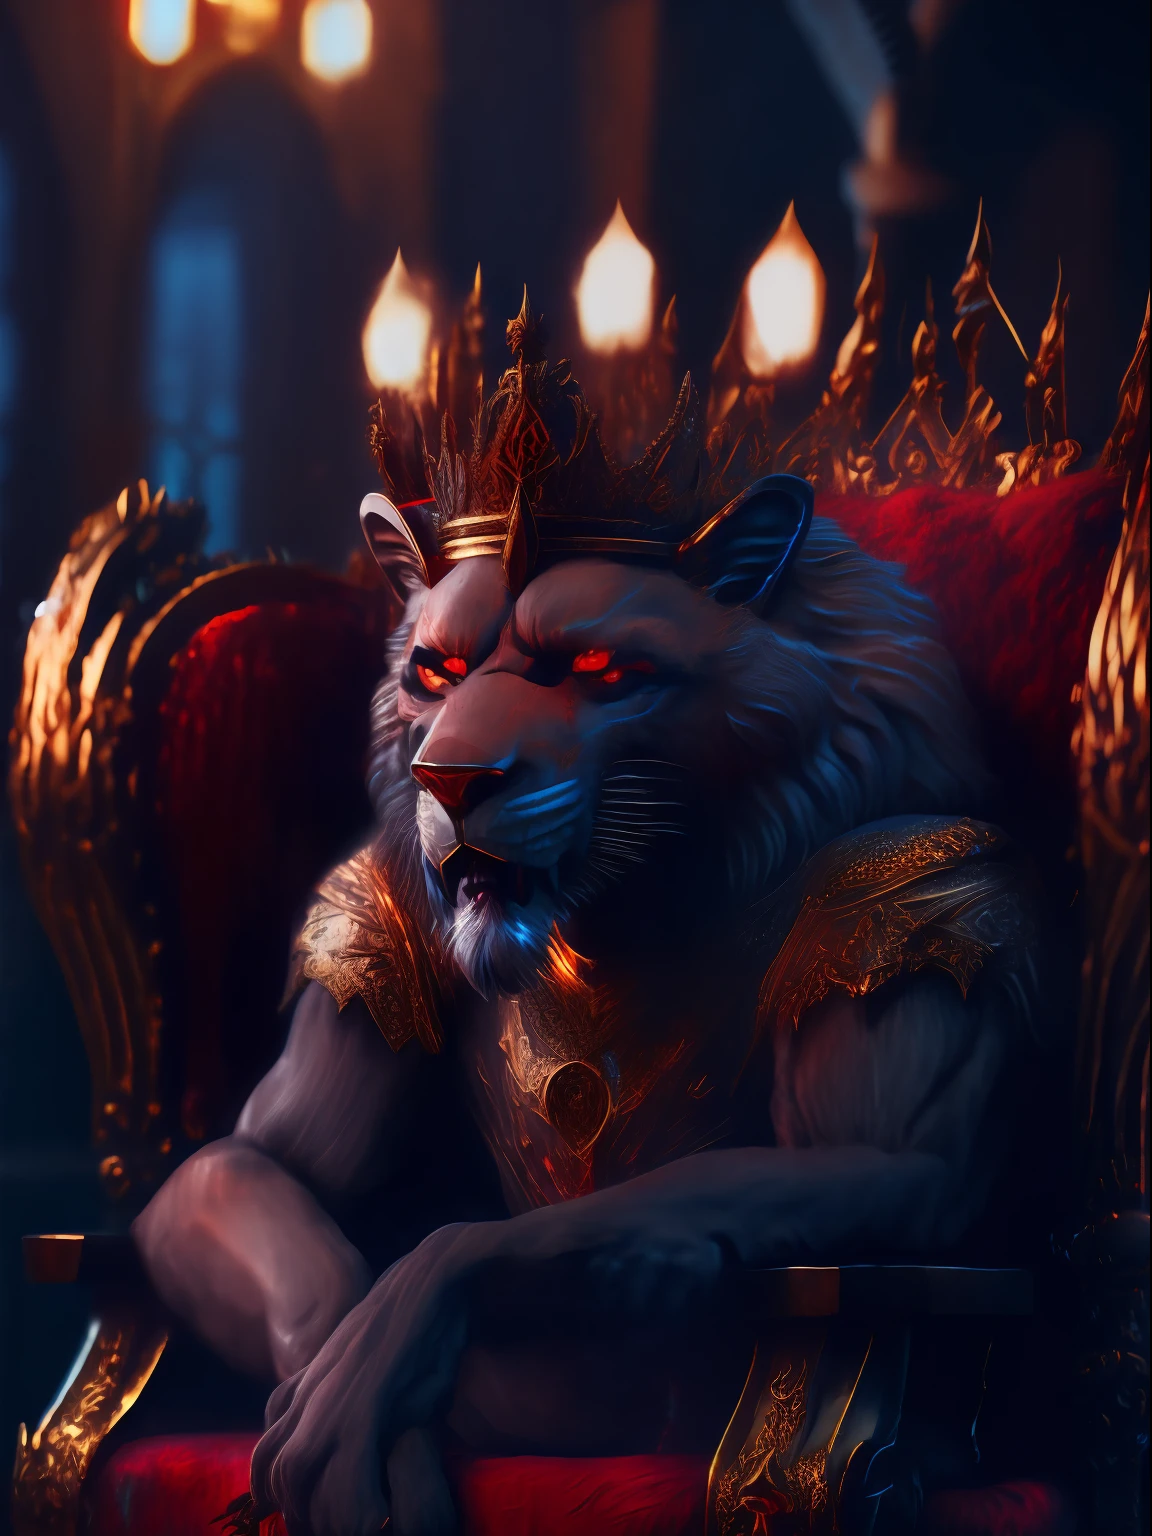 an old werewolf king sitting on the throne, ((two panthers with red, very glowing eyes, sitting on either side of the throne)), hyper real, tension, cold, Highly Detailed, Sharp Focus, professional, 8k UHD, in the heart of the city of Glas, The Throne is a very wet place full of puddles and leaks, majestic, intimidating, Ornate Armor, Royal Crown, blurred background, Daylighting, looking at viewer, cinematic, dark, violent, highly detailed 8K